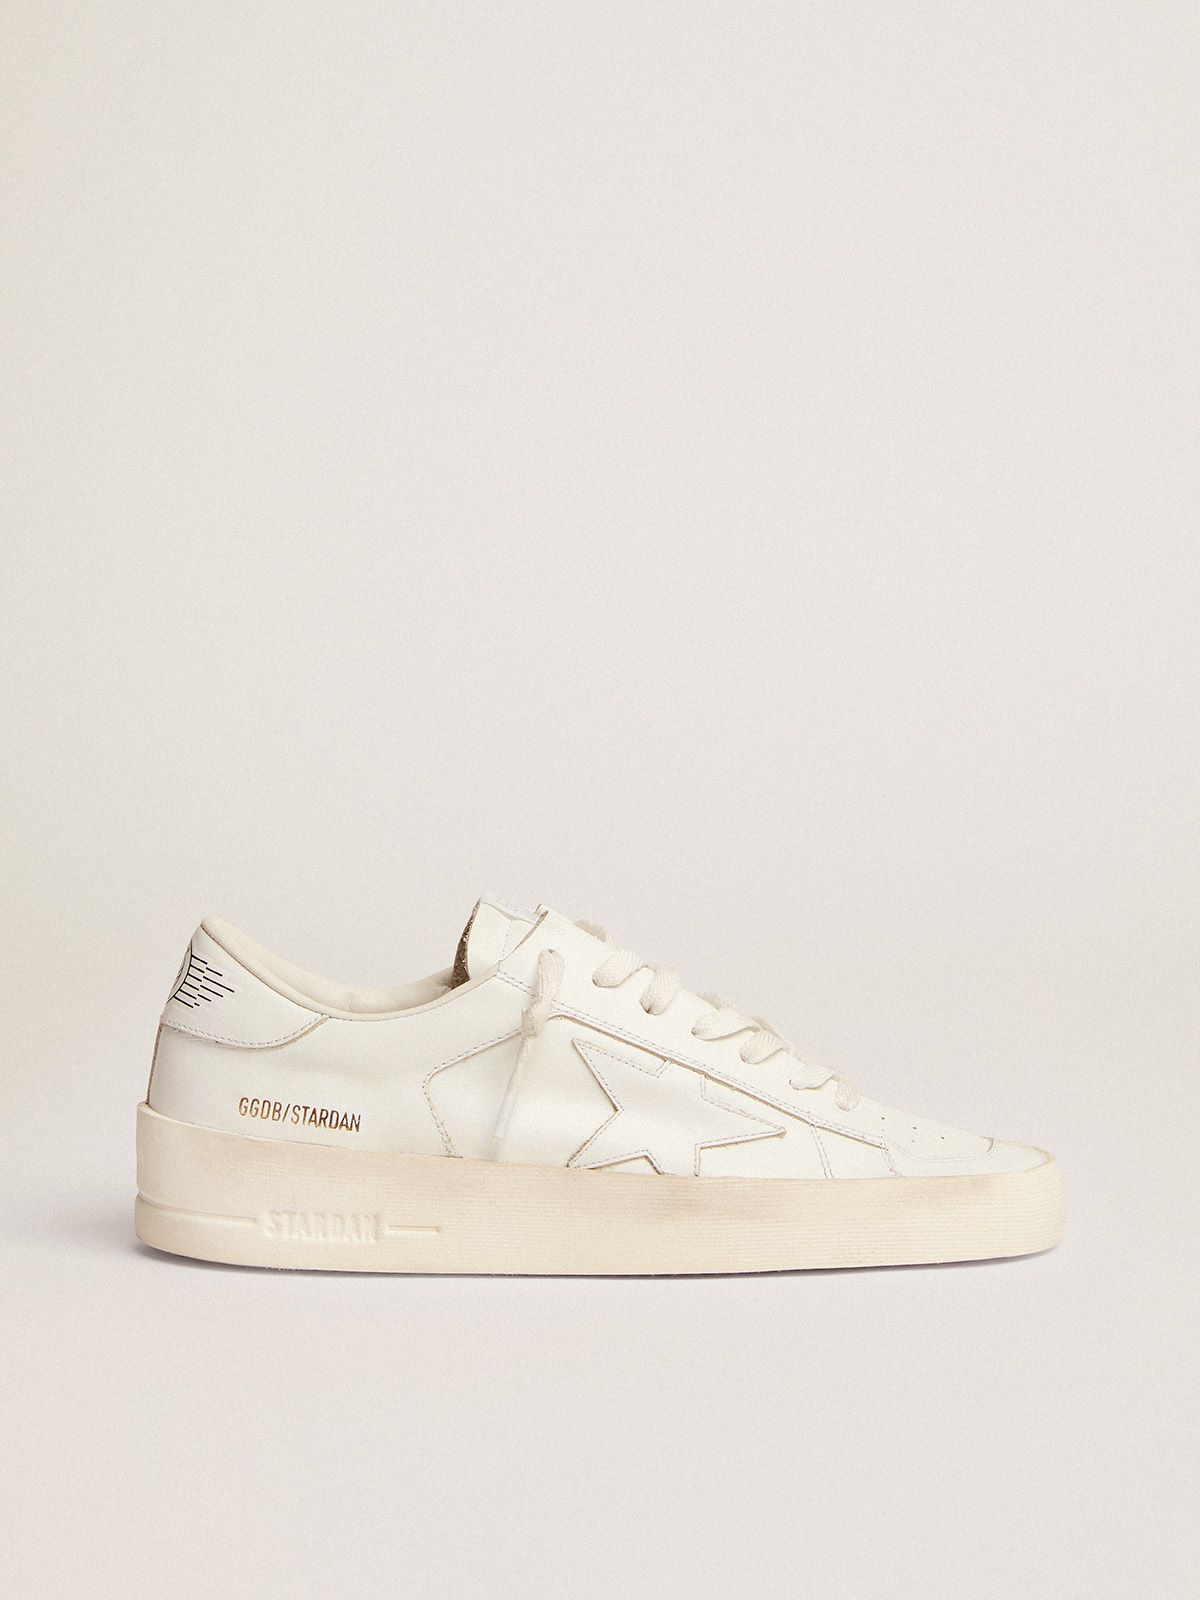 golden goose sneakers white Stardan total leather in